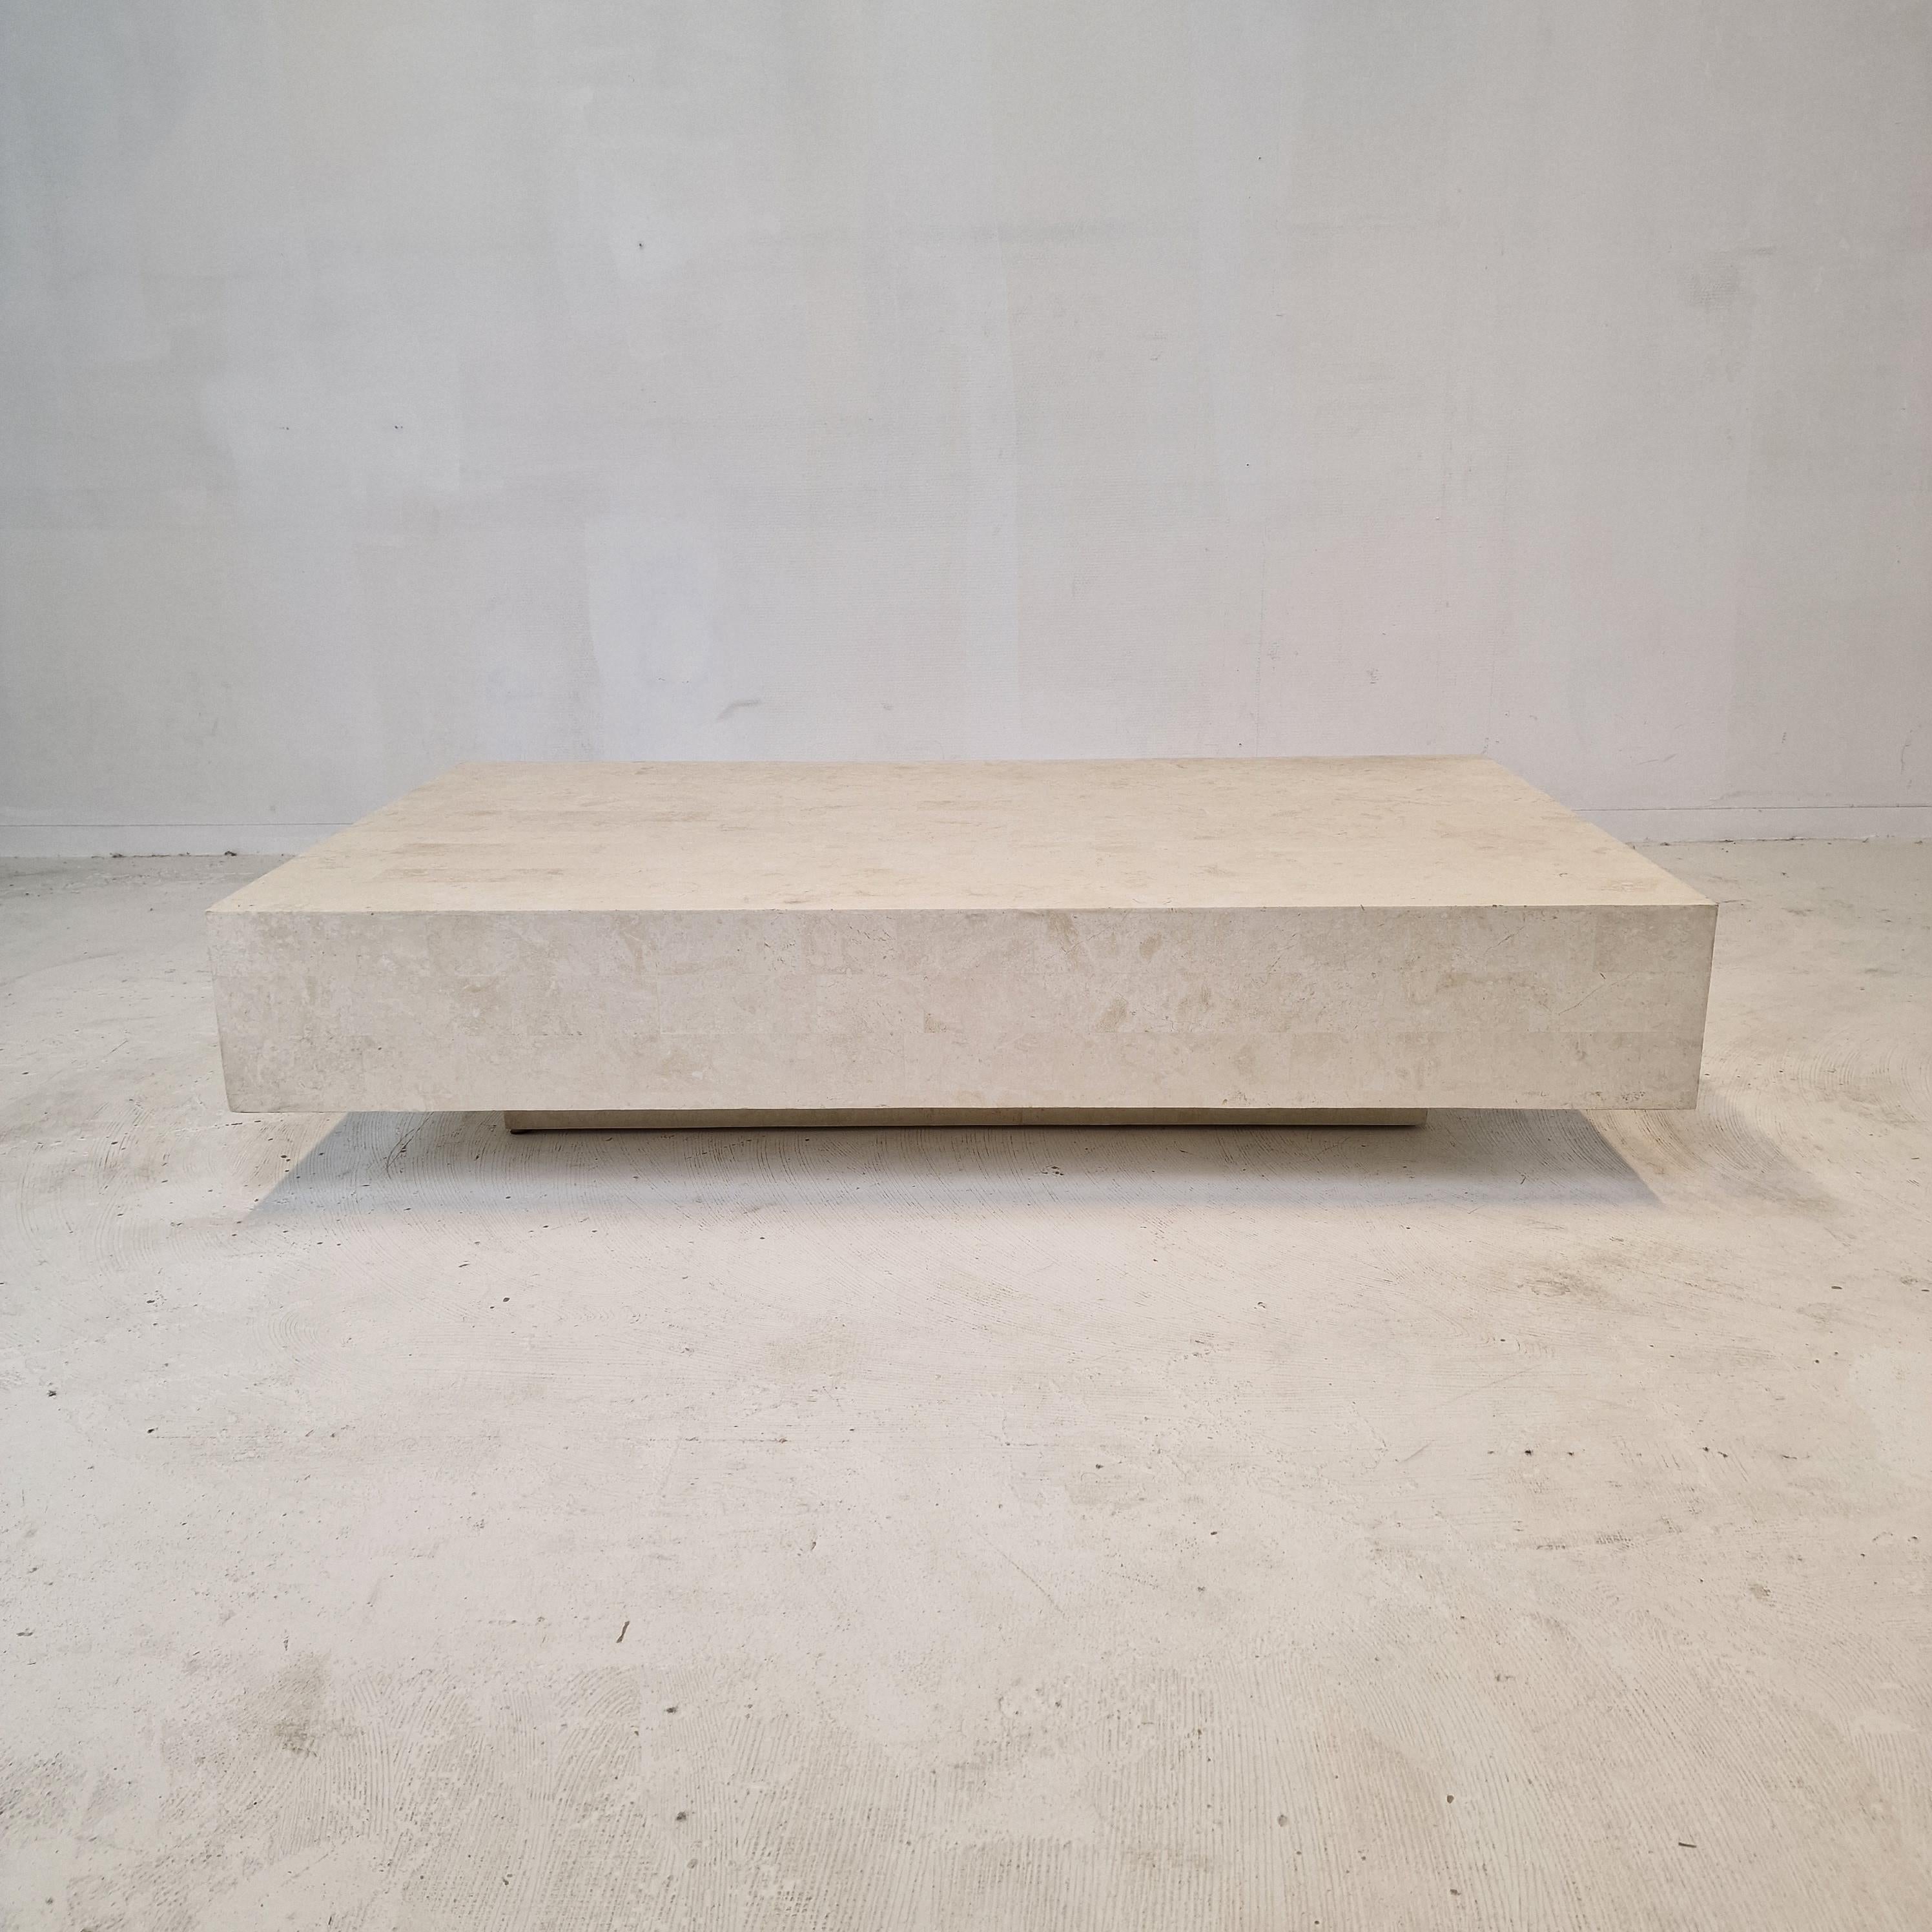 Rare and very nice coffee table by Magnussen Ponte, 1980s.

This stunning table is made of Mactan stone also named Fossil Stone.

Mactan stone is found only on the island of Mactan in the South Philippines. 
It is an ancient rock in which you